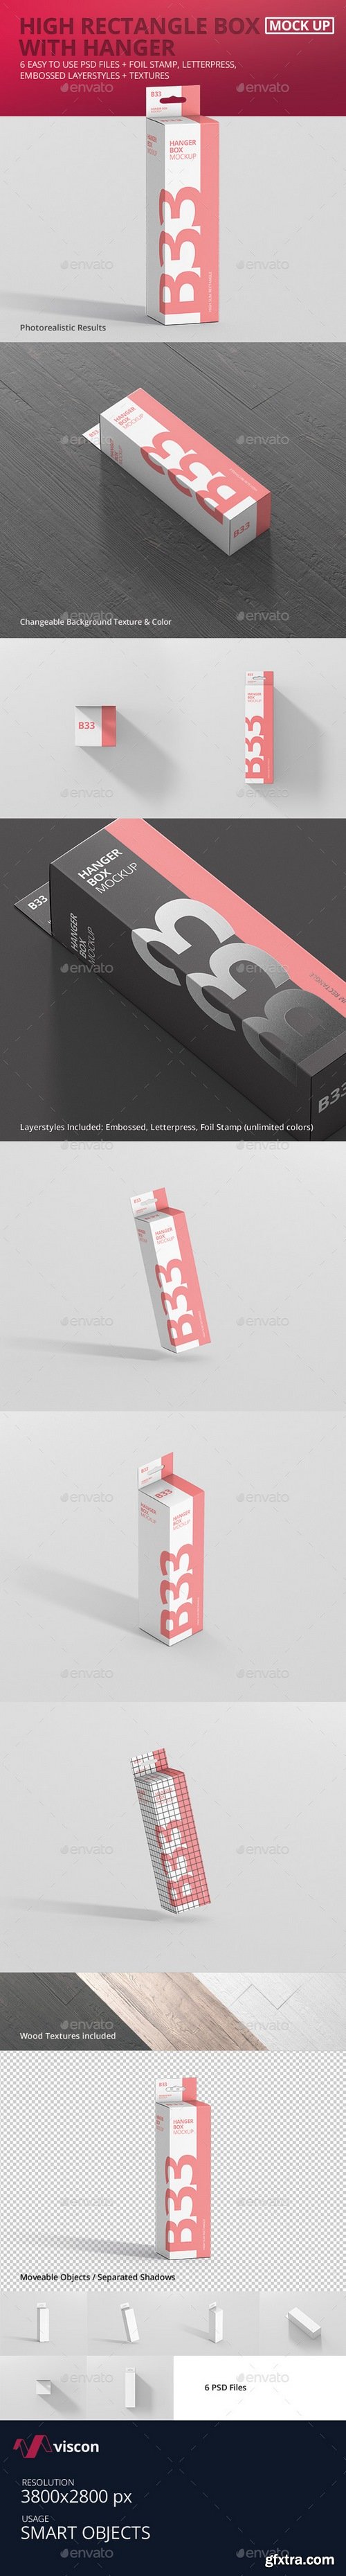 Graphicriver - Box Mockup - High Slim Rectangle Size with Hanger 21268347